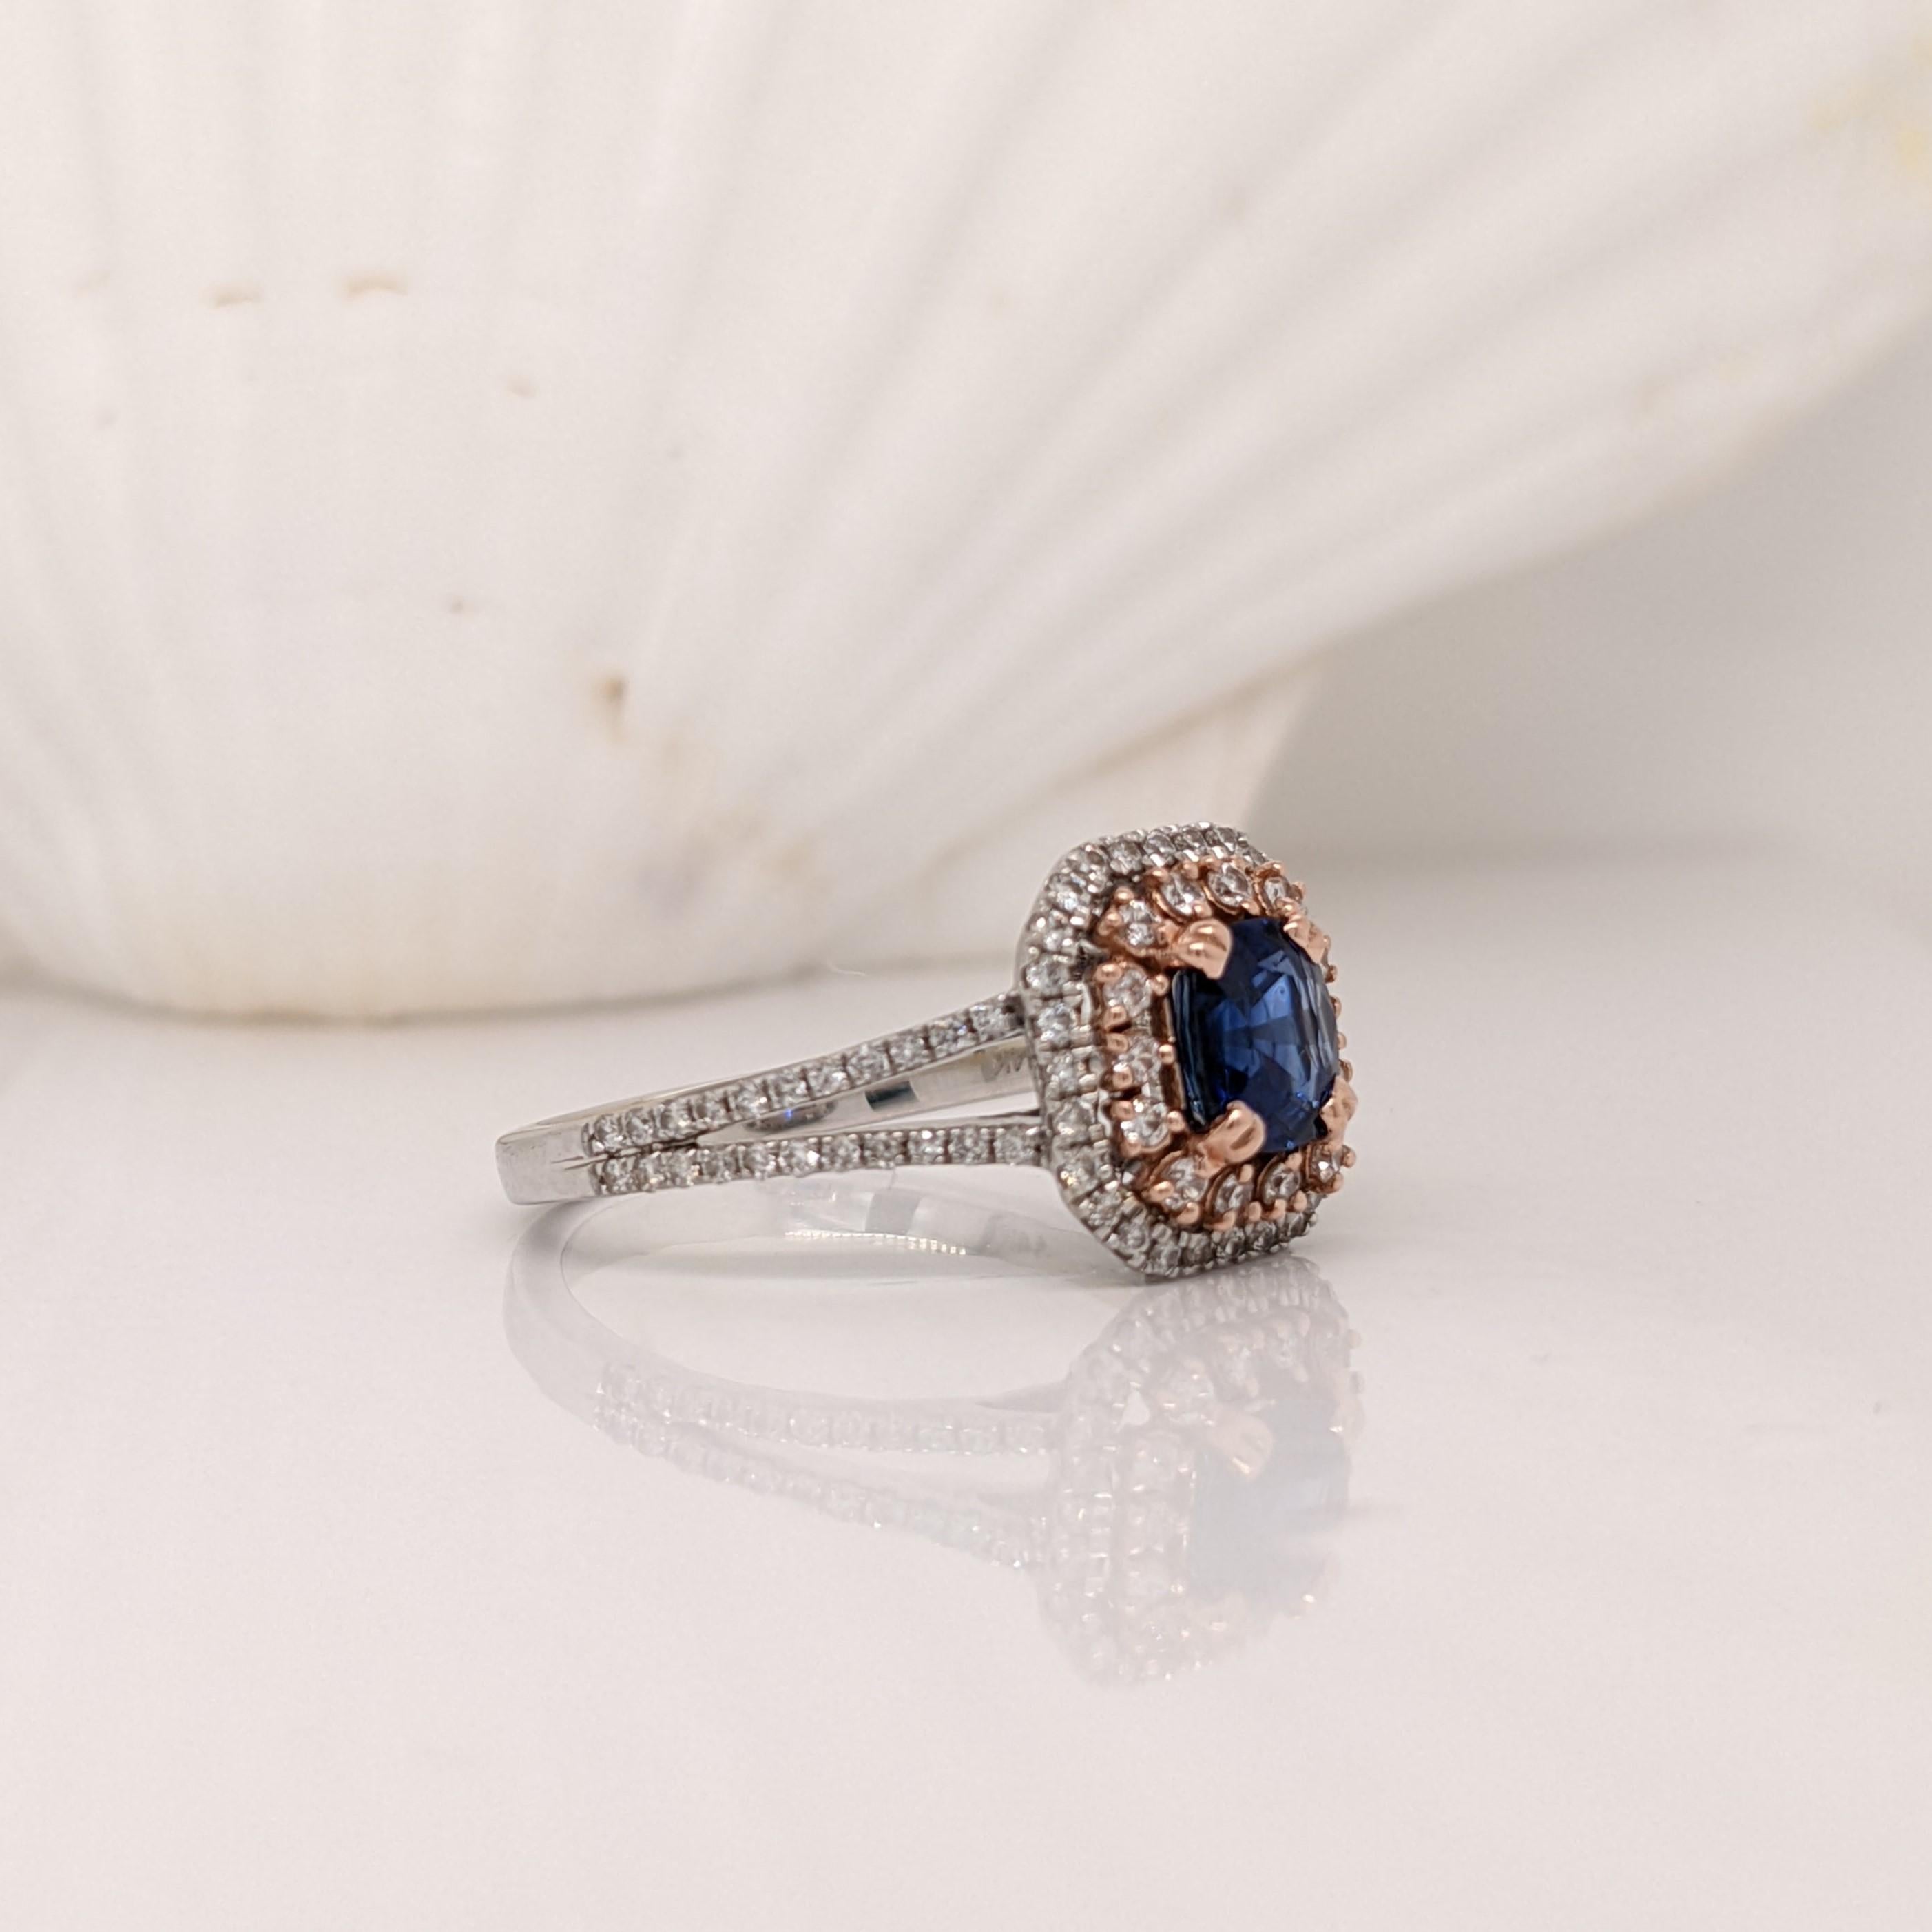 This round blue sapphire is complimented by a double halo of 2 sizes of earth mined natural diamonds set in dual tones of rose and white 14k gold. The emerald cut head shape holds this round gemstone in place securely with a double pronged setting.